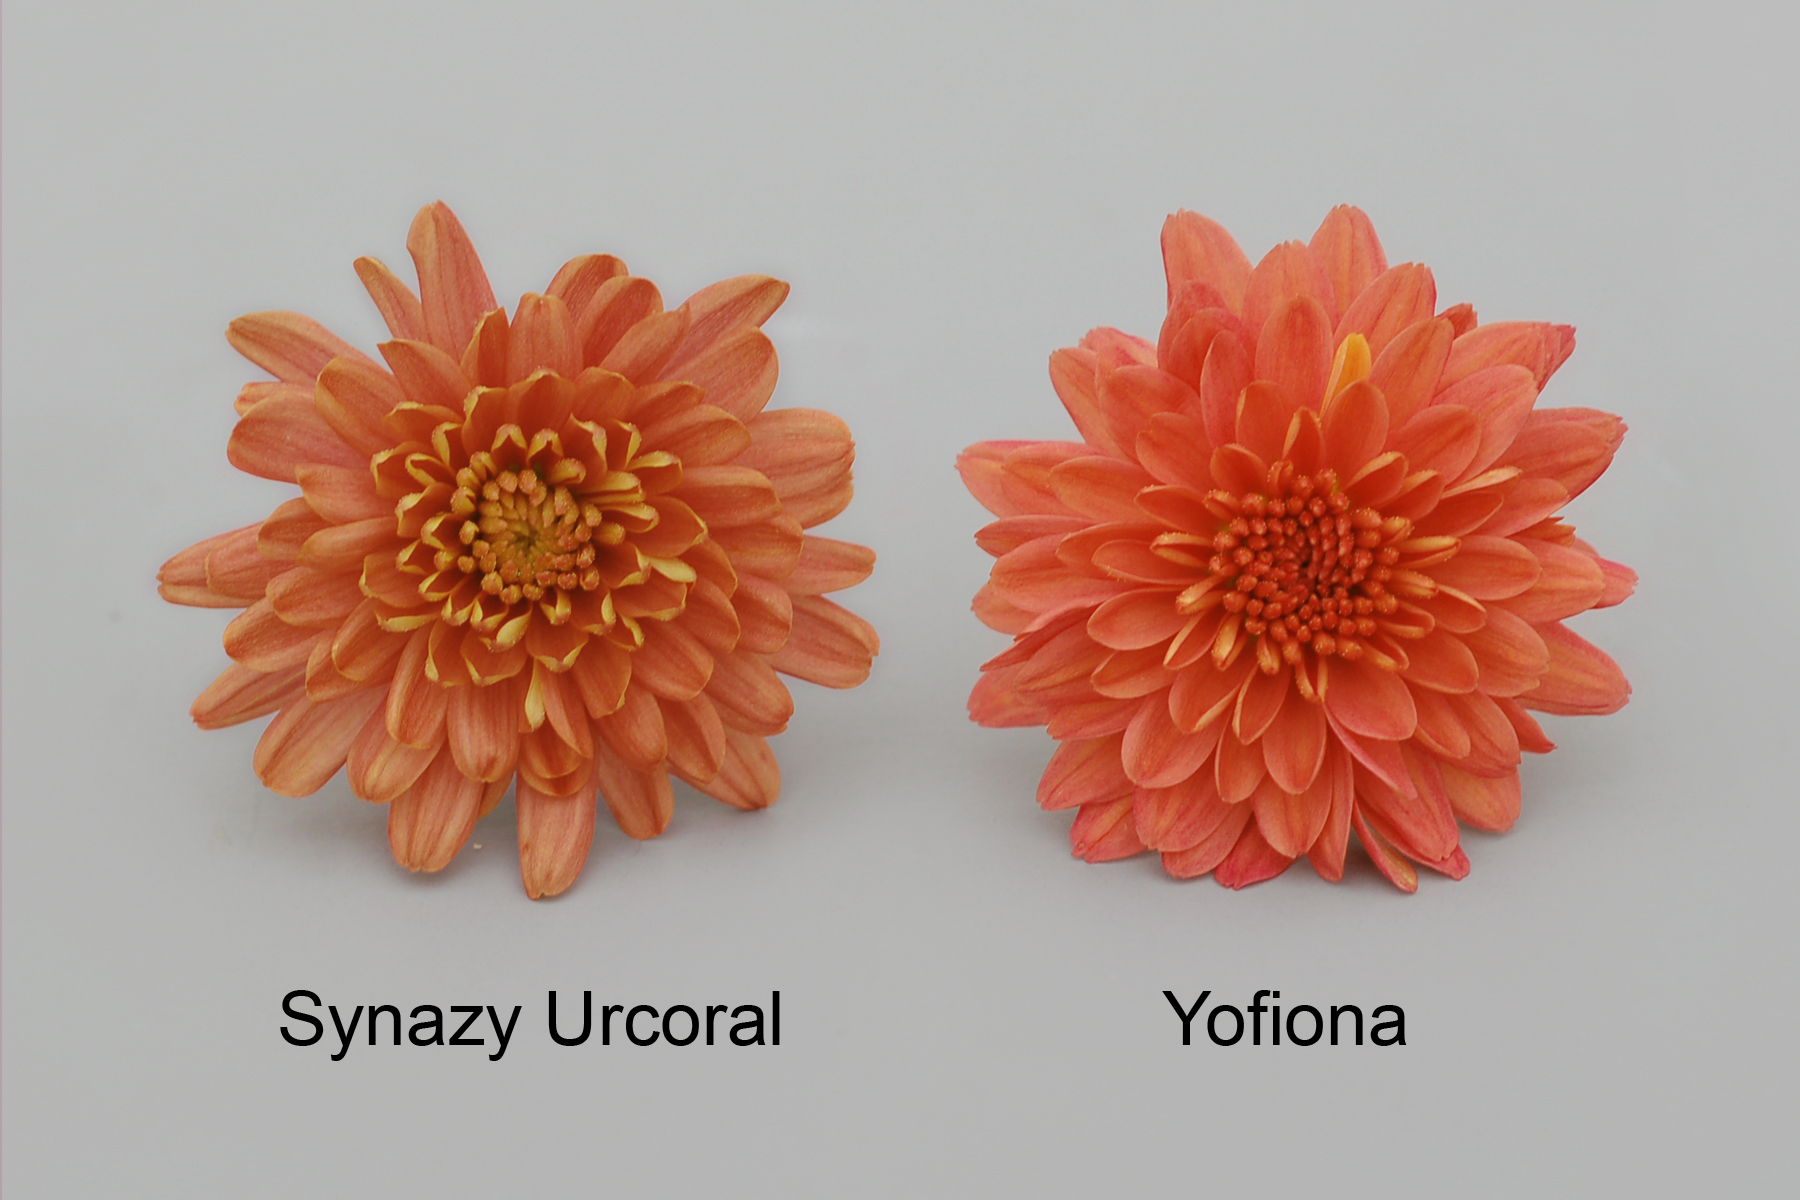 Synazy Urcoral